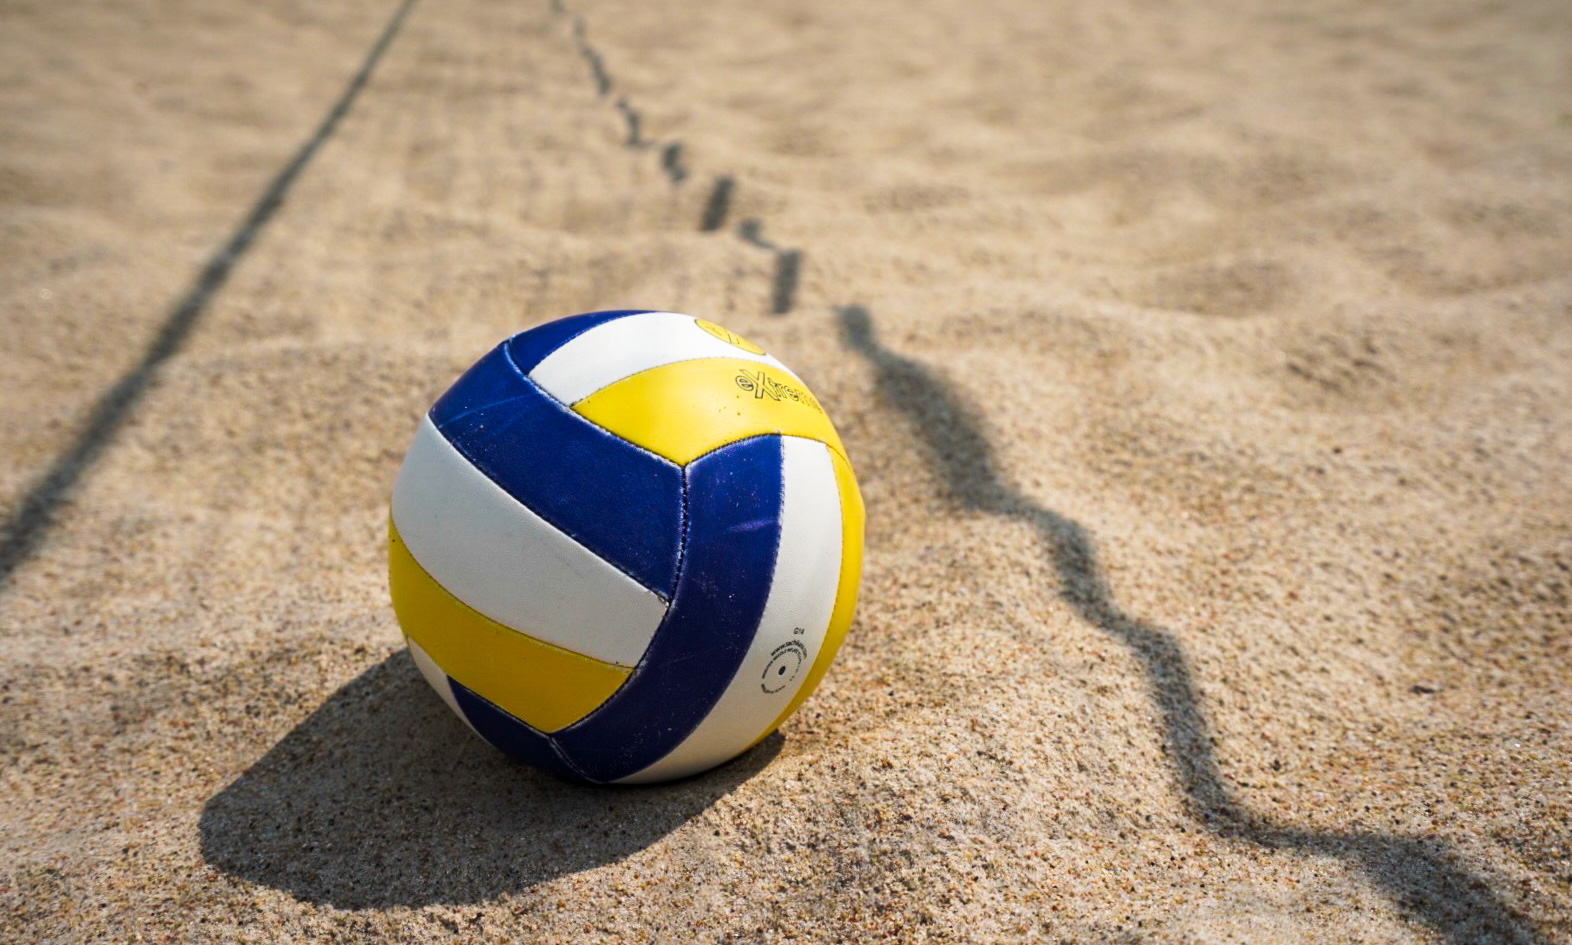 Volleyball on a sand volleyball court.